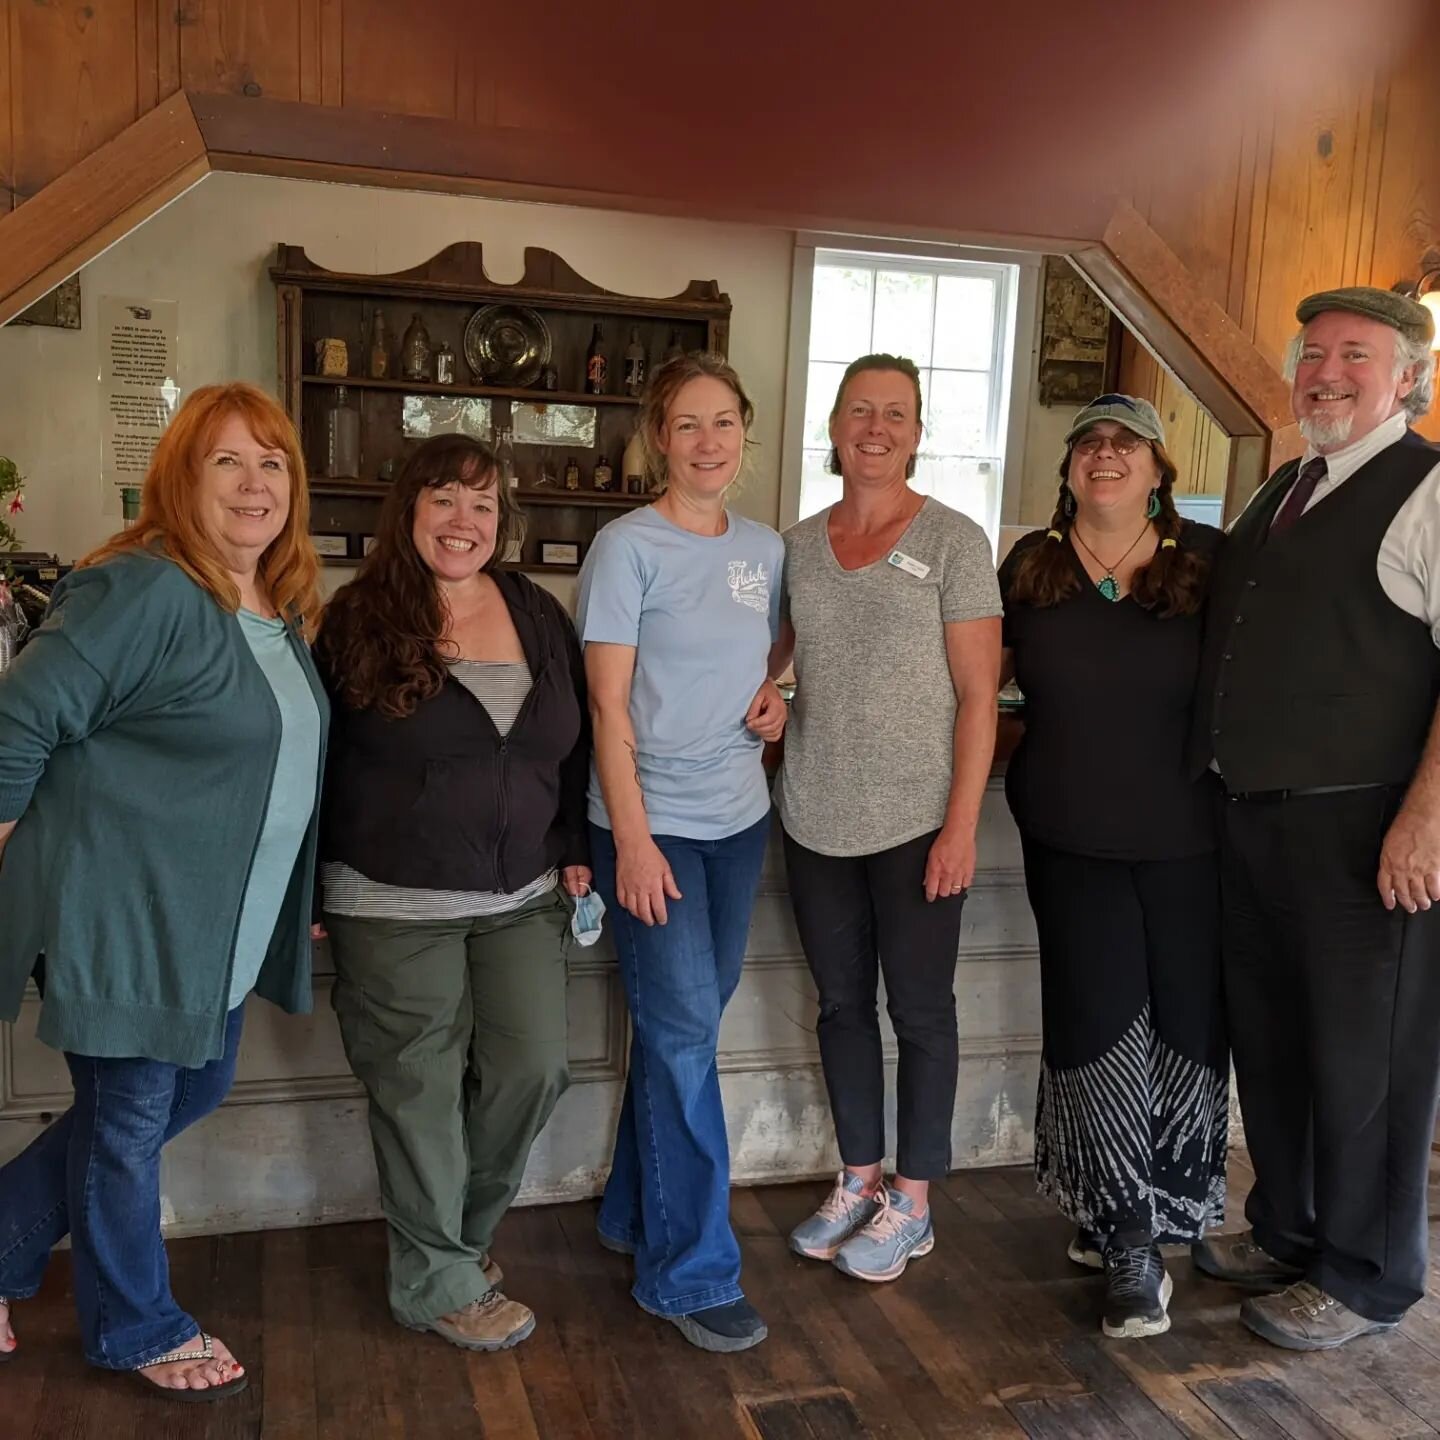 Last weekend we celebrated the opening of the fantastic Captain Fletcher's Inn at Navarro River Redwoods State Park!

We kicked the day off with a fun and very interesting talk by State Parks interpreter Michelle Levesque along with a discussion on a